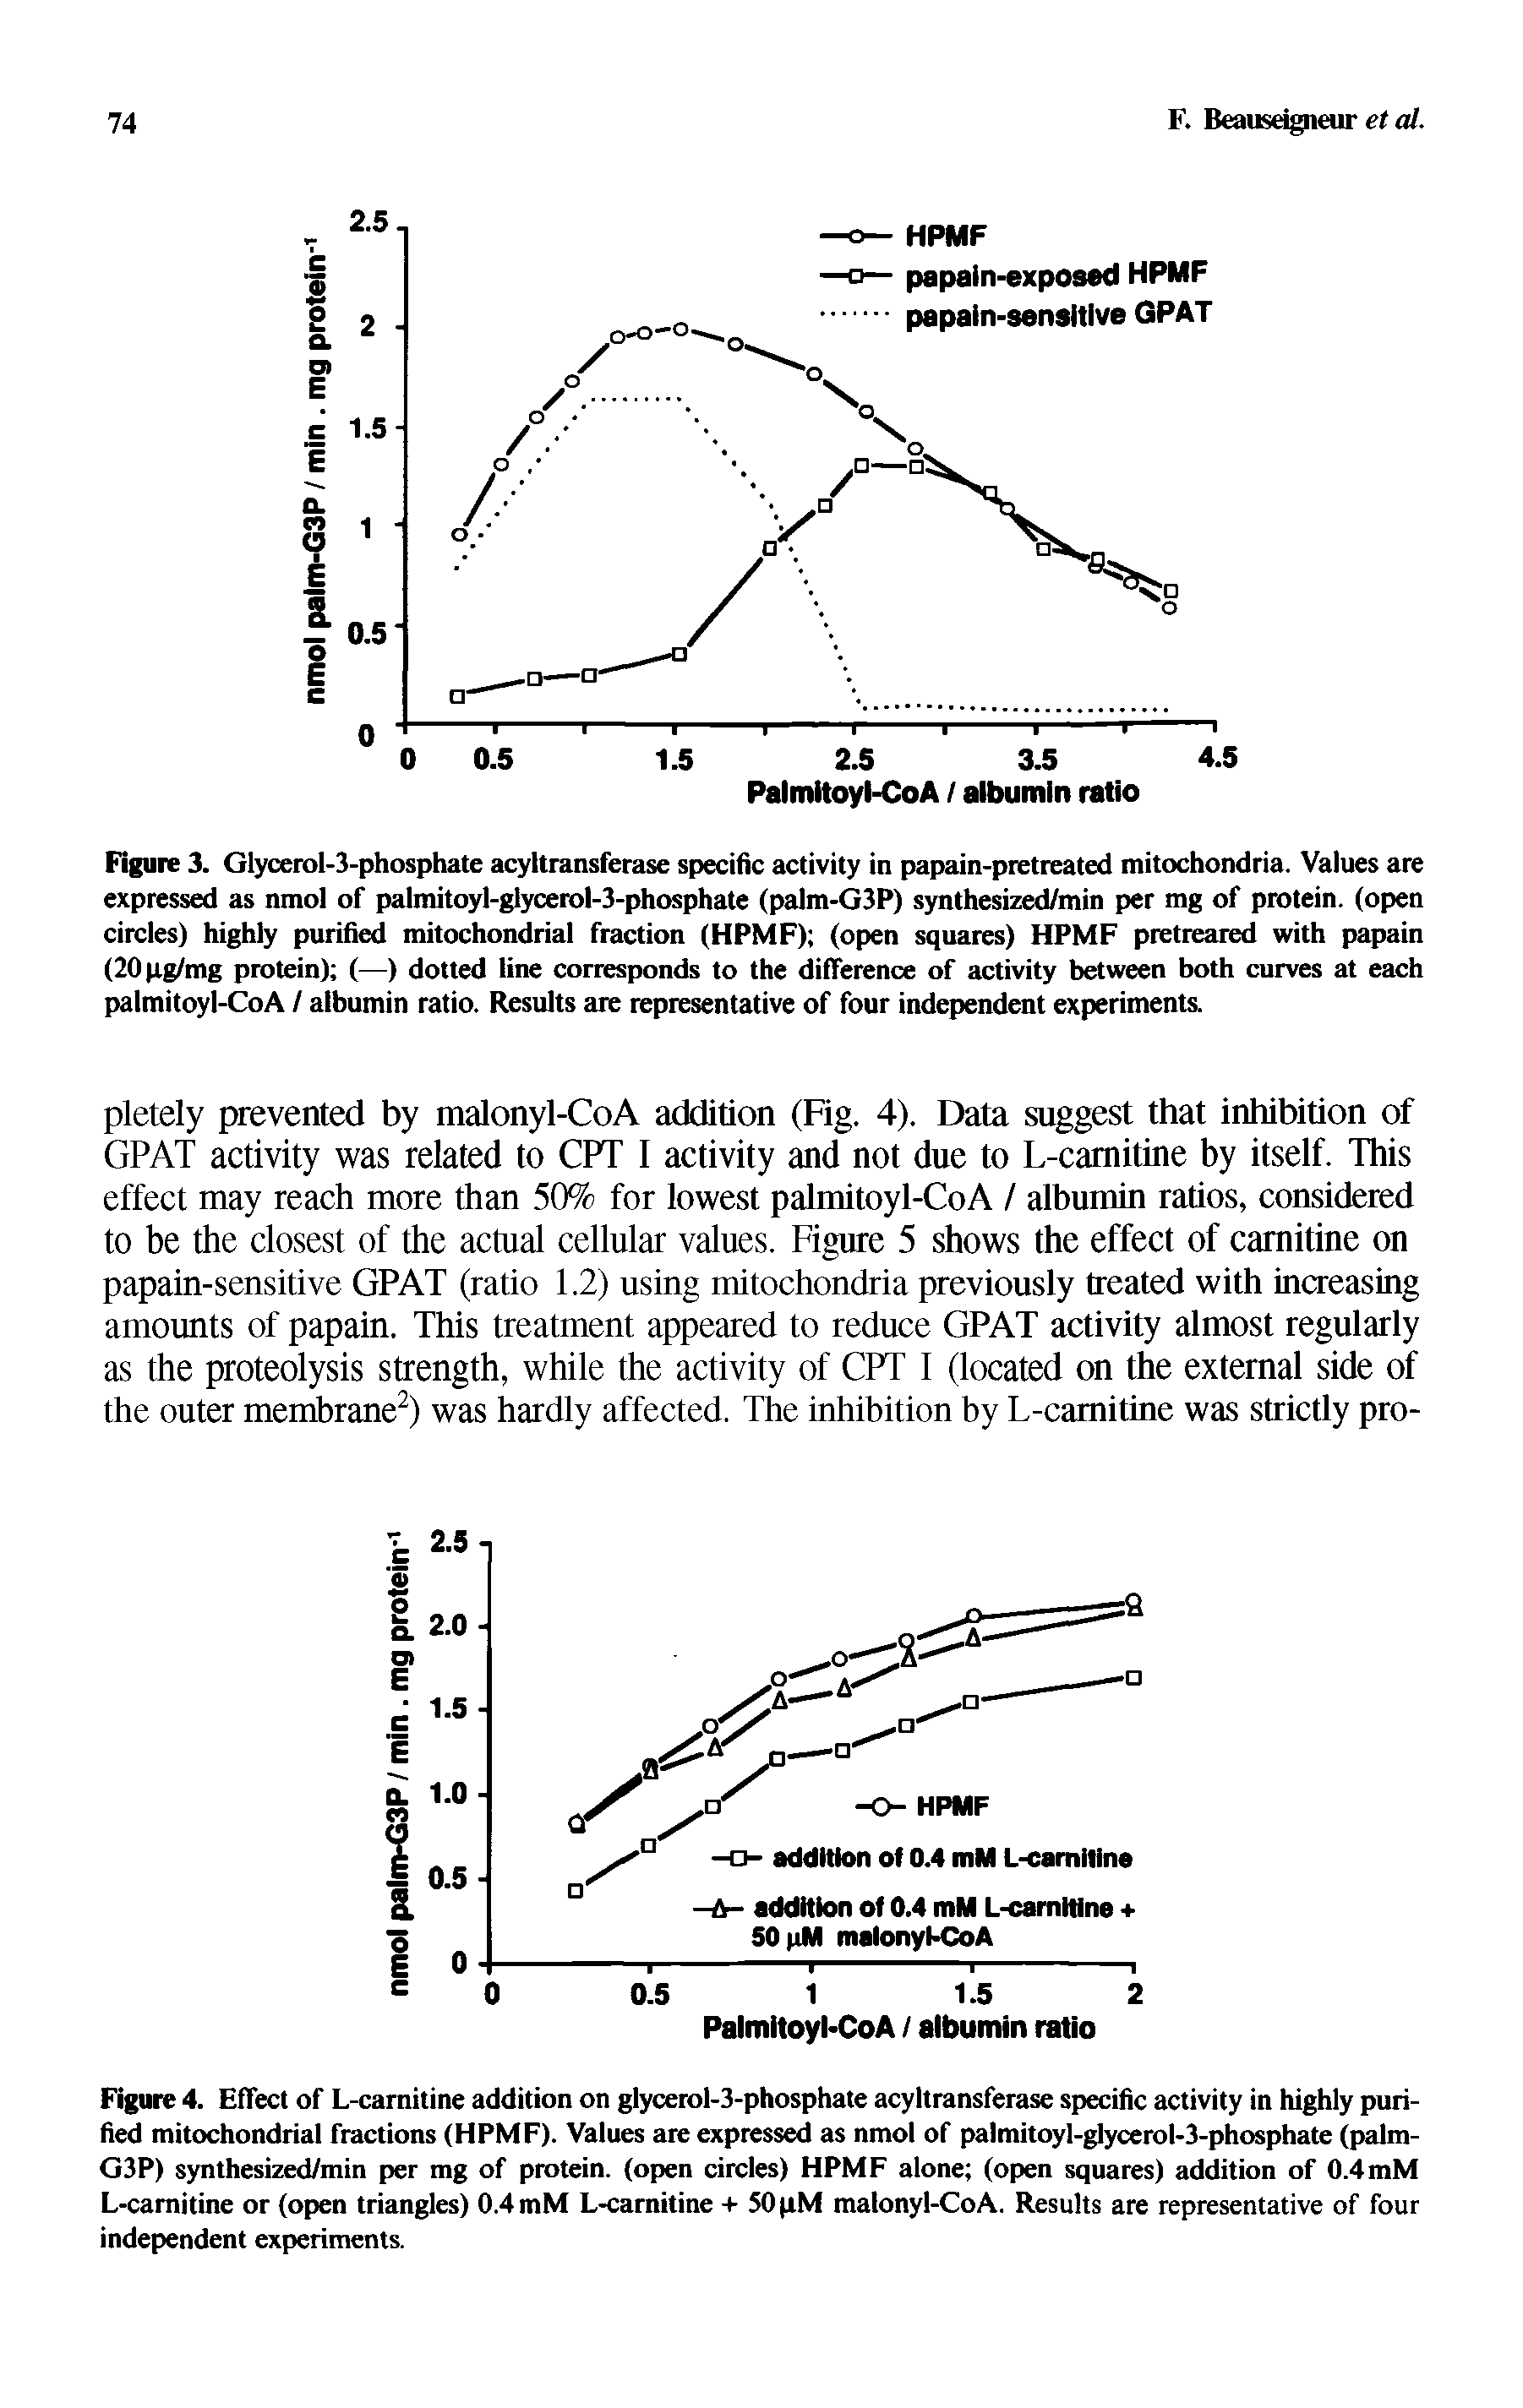 Figure 4. Effect of L-camitine addition on glycerol-3-phosphate acyltransferase specific activity in highly purified mitochondrial fractions (HPMF). Values are expressed as nmol of palmitoyI-glycerol-3-pho phate (] m-G3P) synthesized/min per mg of protein, (open circles) HPMF alone (open squares) addition of 0.4mM L-camitine or (open triangles) 0.4 mM L-camitine + SOpM malonyl-CoA. Results are representative of four independent experiments.